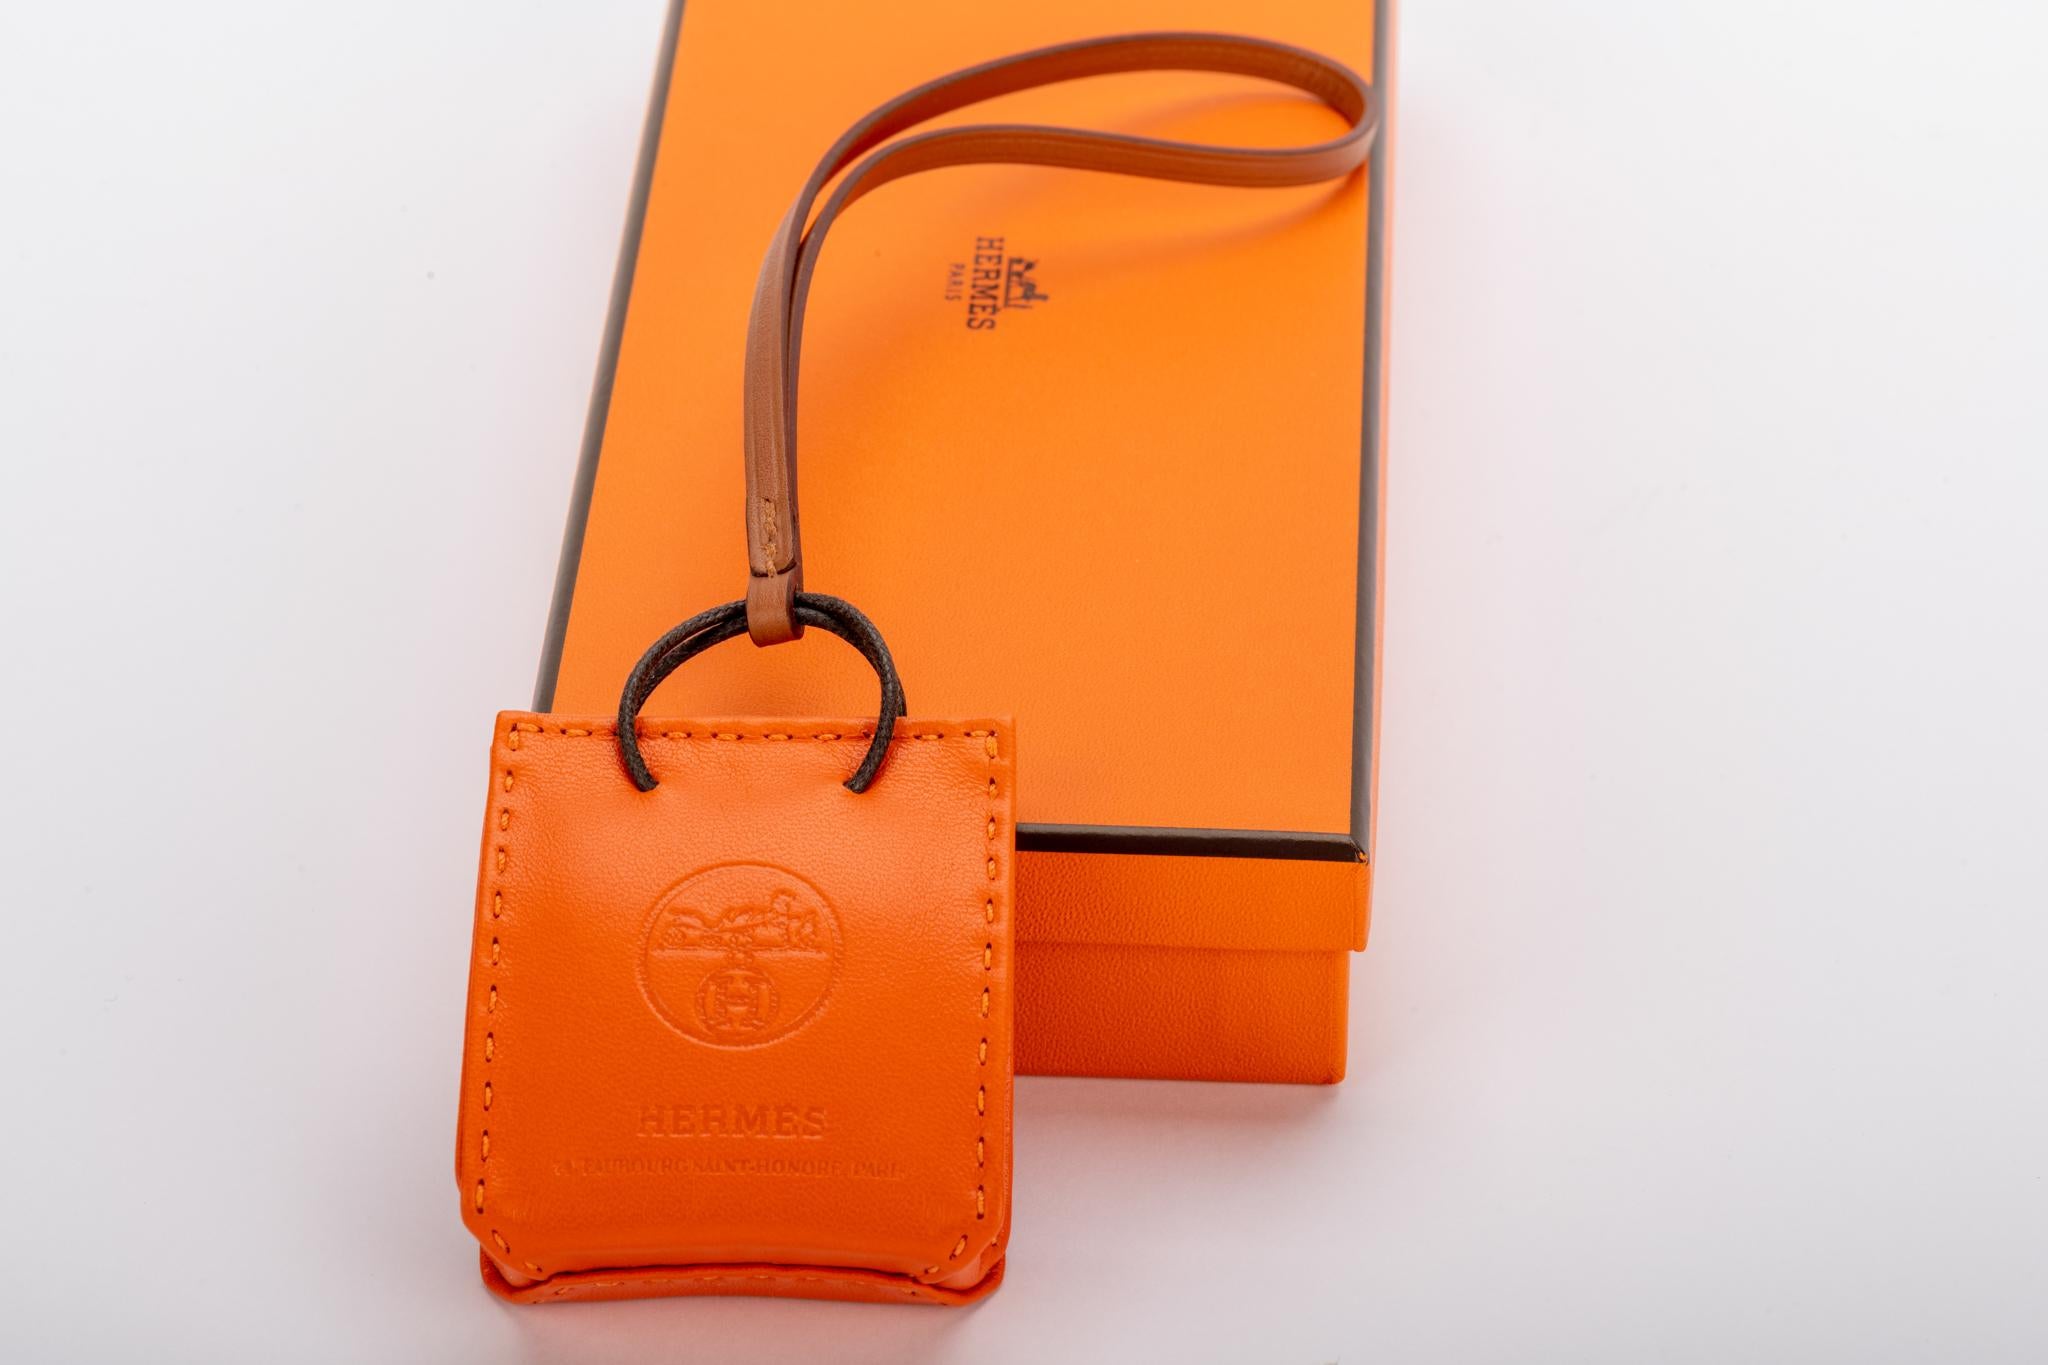 Hermes 2020 collection orange bag charm in swift leather. Brand new with original box.